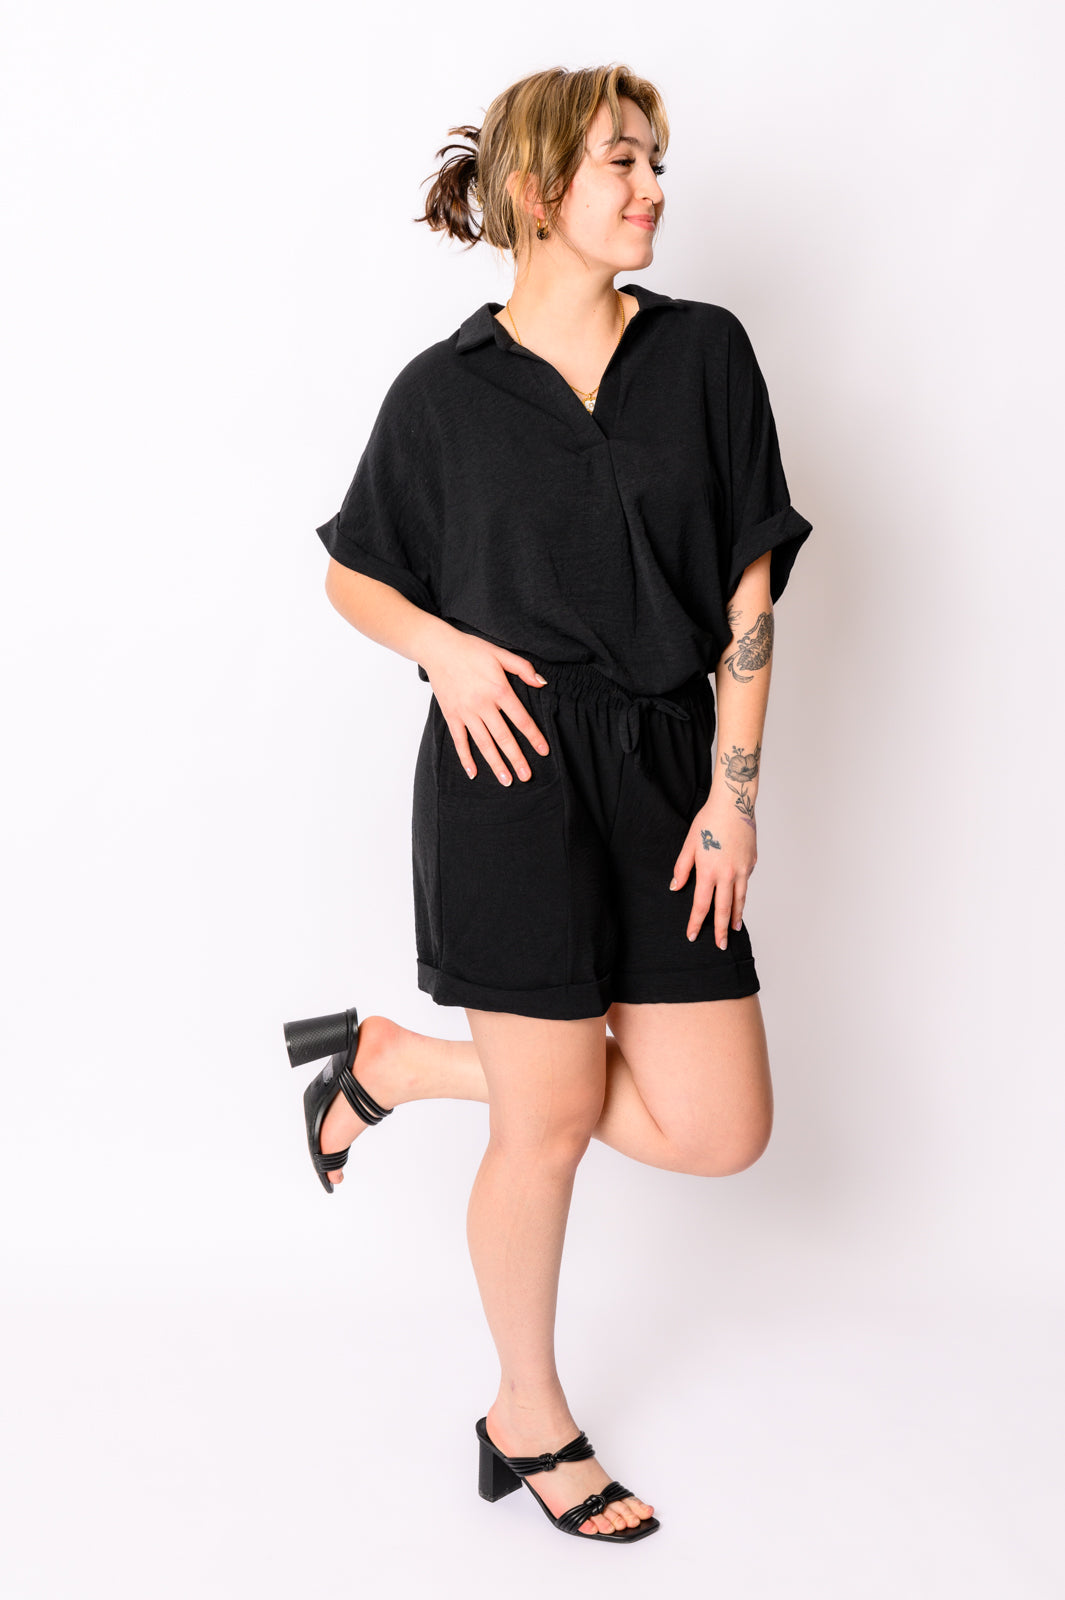 Dress Up With Attitude Dolman Top